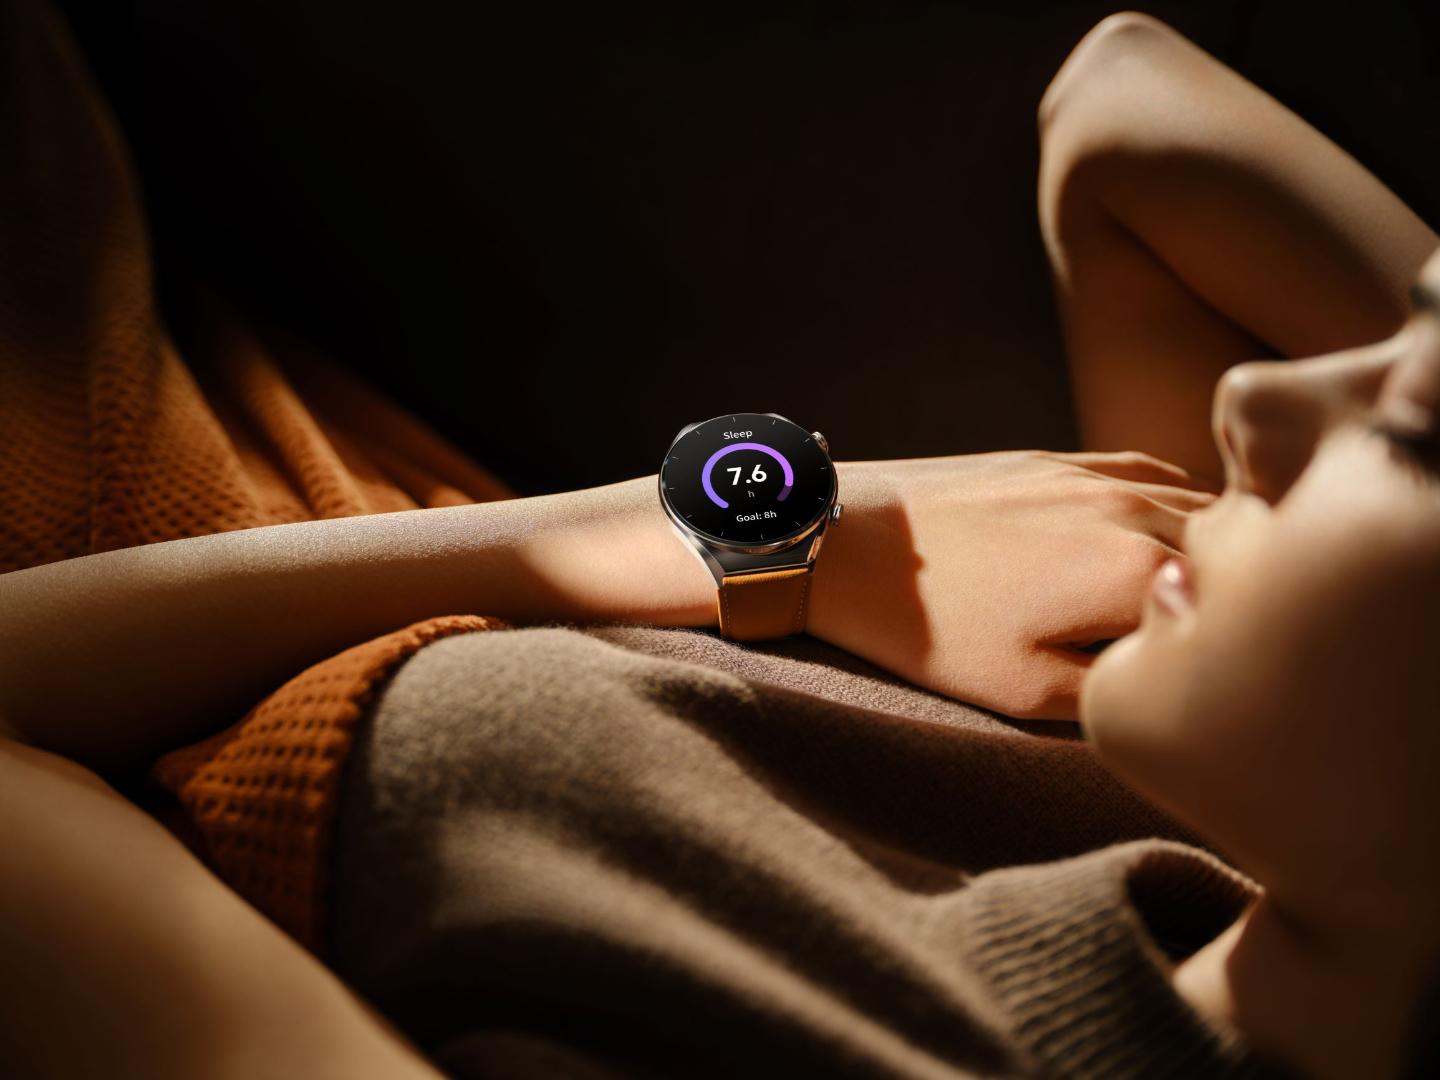 Xiaomi Watch S1 smartwatches launch globally from €179 with NFC